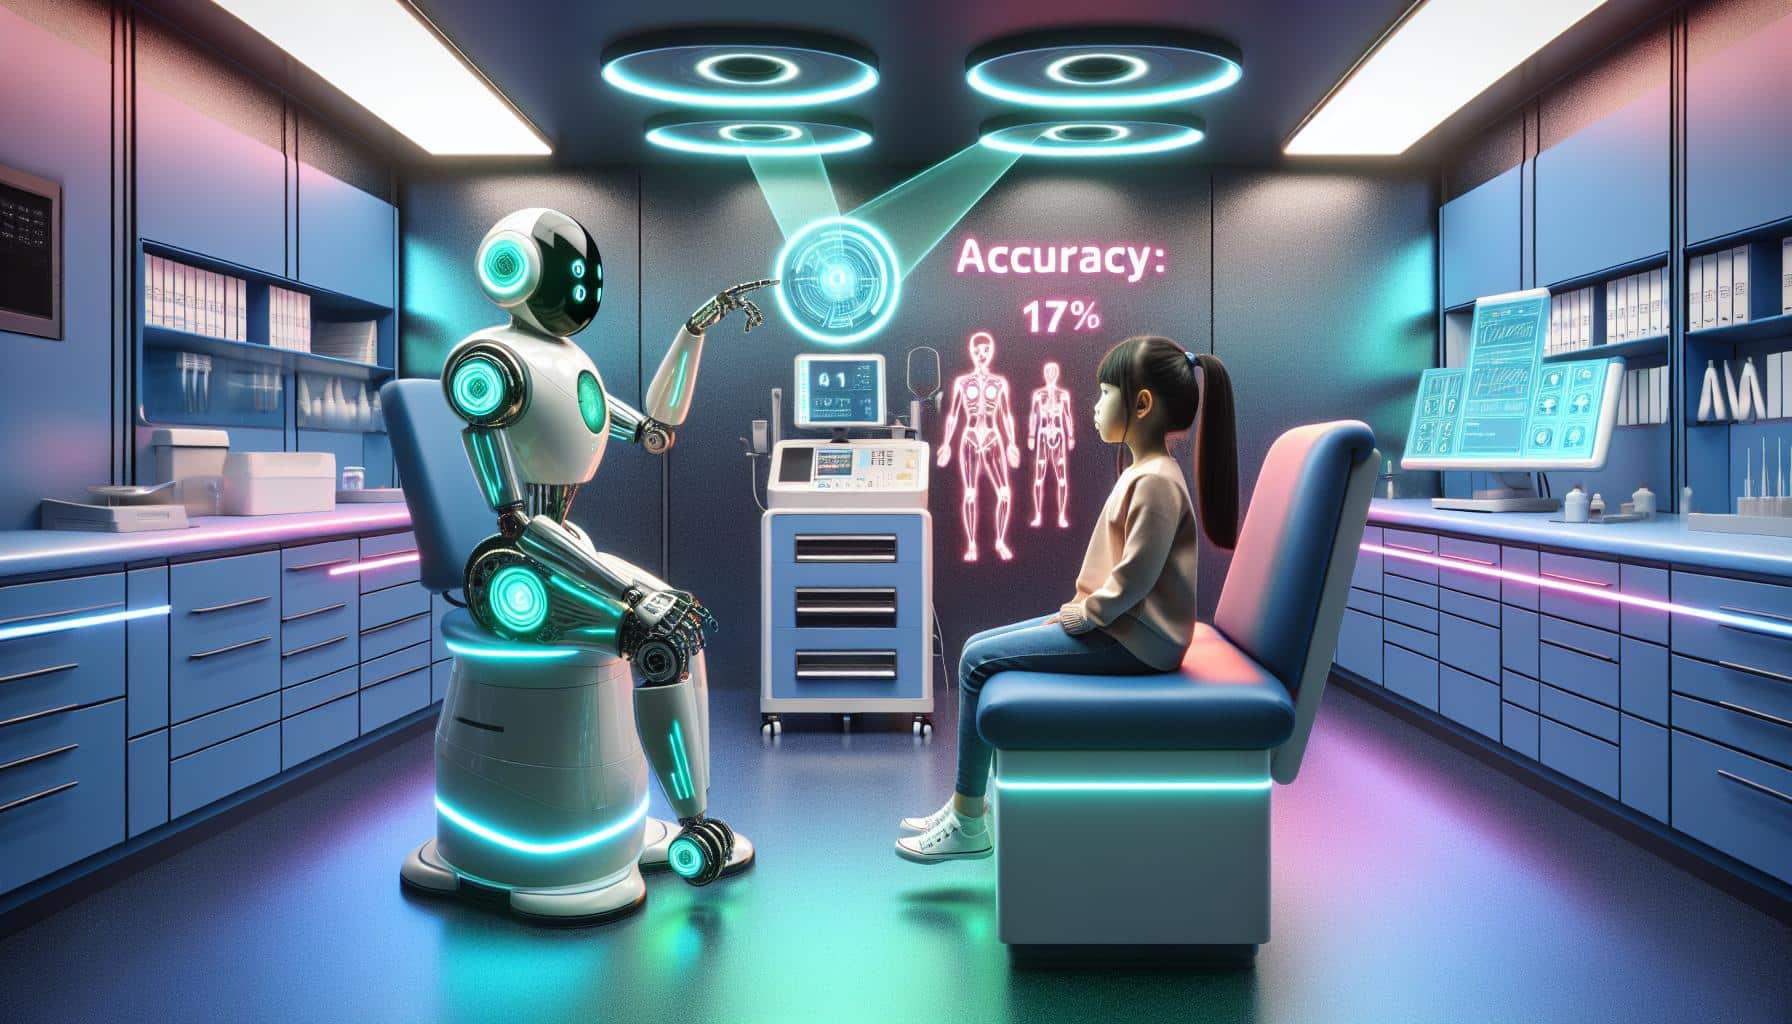 Medical Chatbots: Accuracy Just 17% in Diagnosing Children | FinOracle